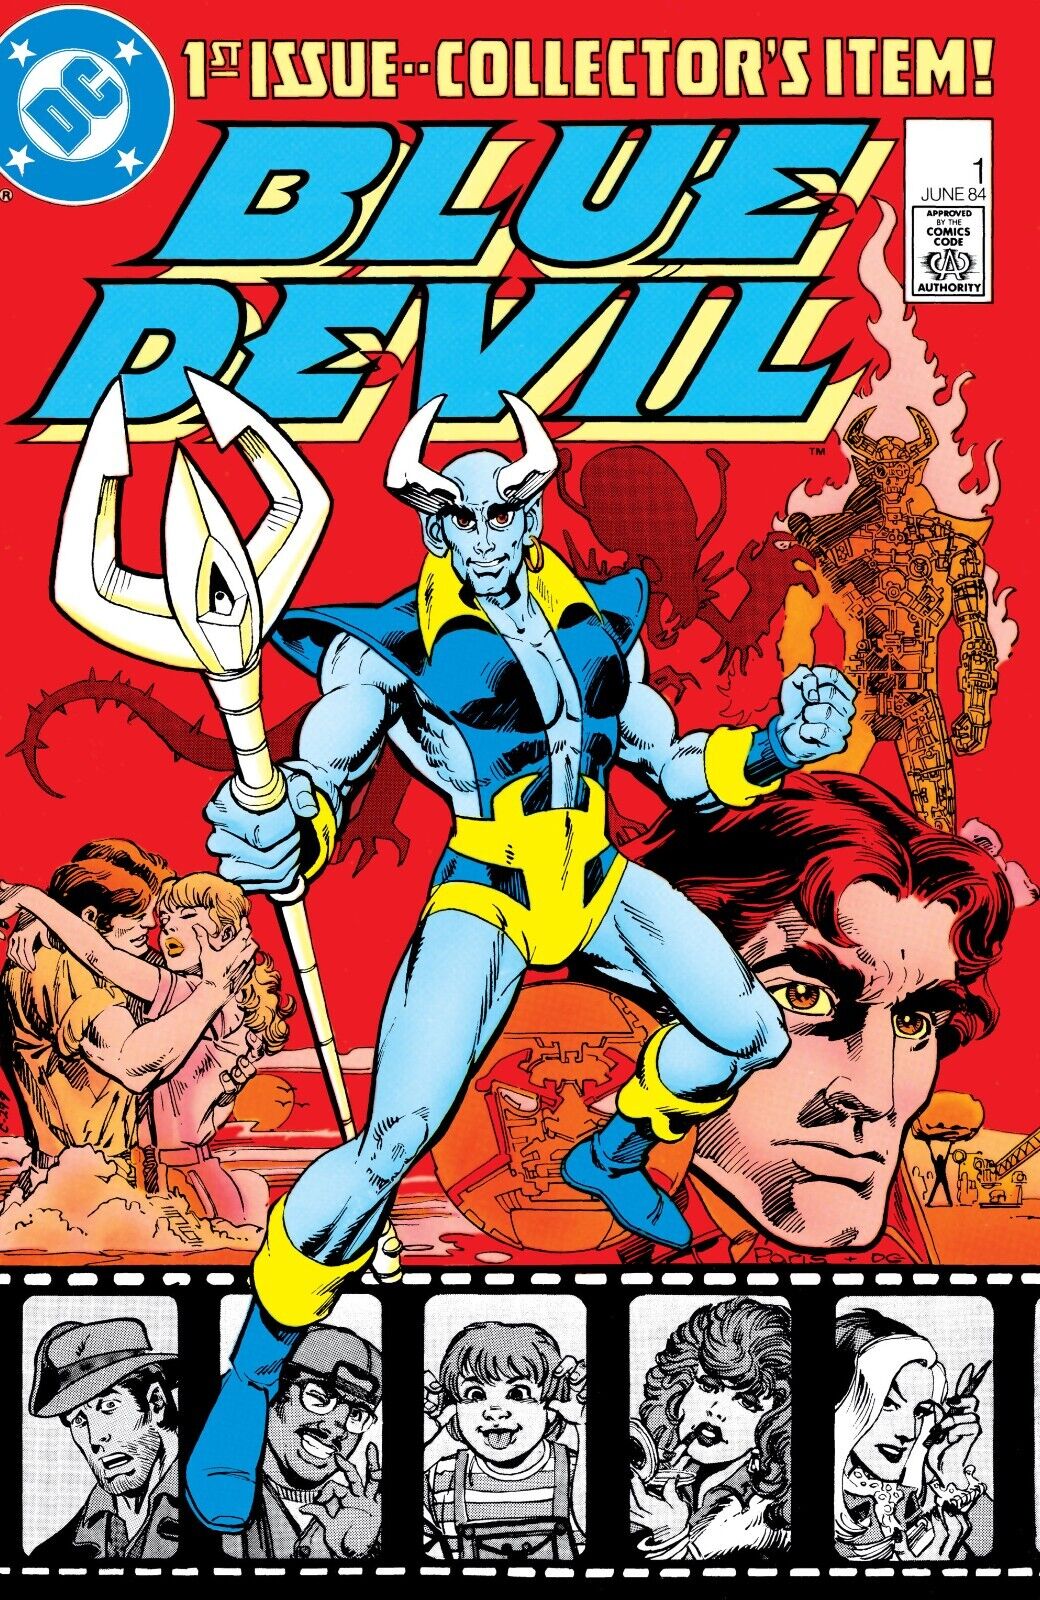 BLUE DEVIL DIGITAL COMICS FREE with purchase of the ART Printed DVD & case *